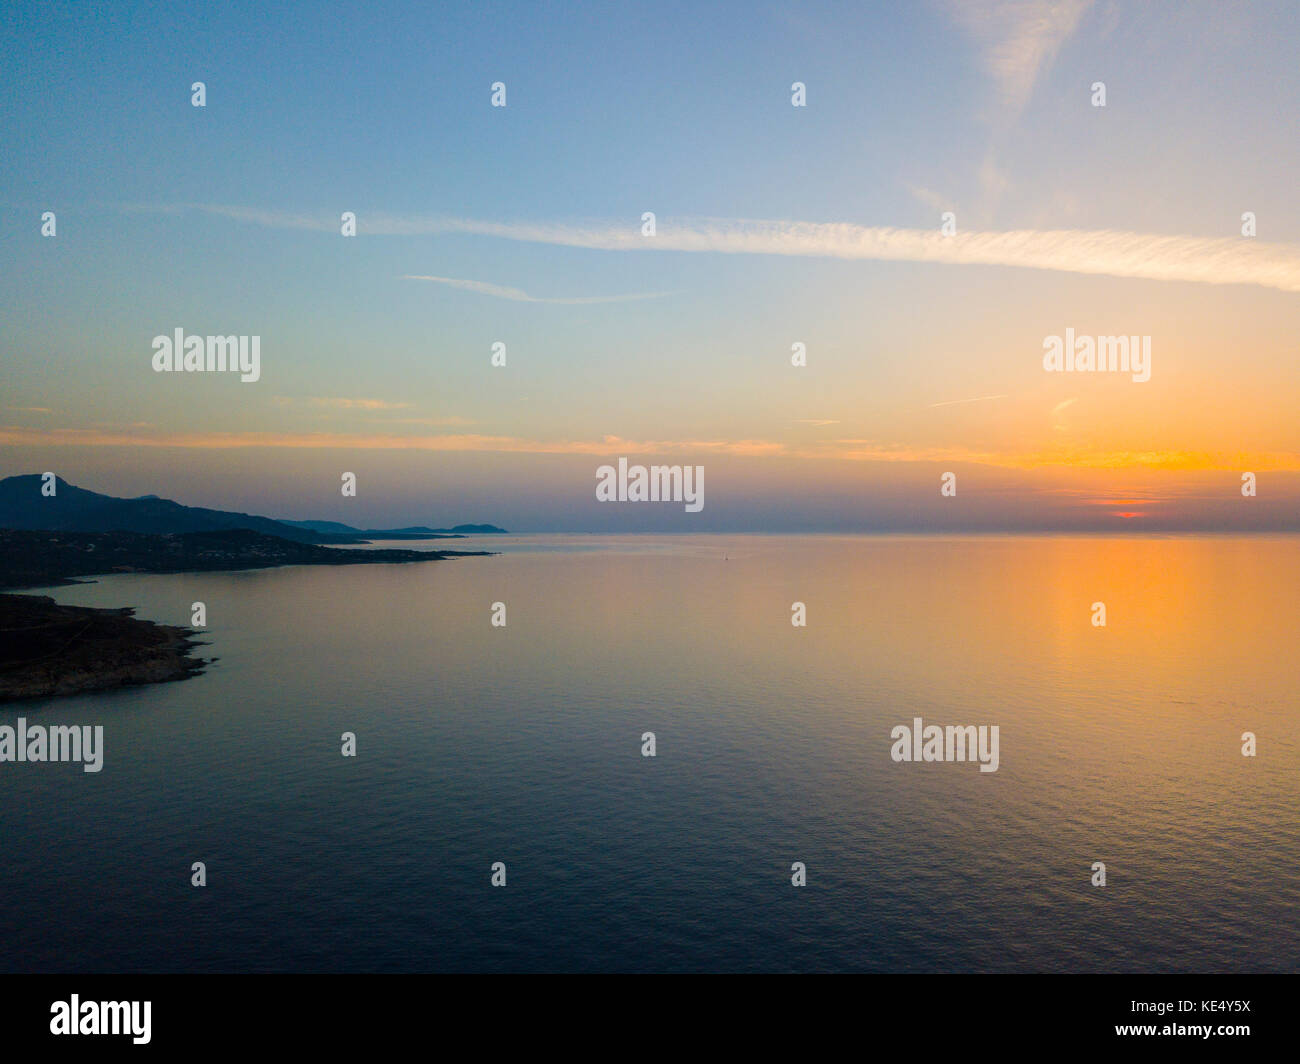 Aerial view of Corsica coast at sunset, promontories bordering the sea. France Stock Photo